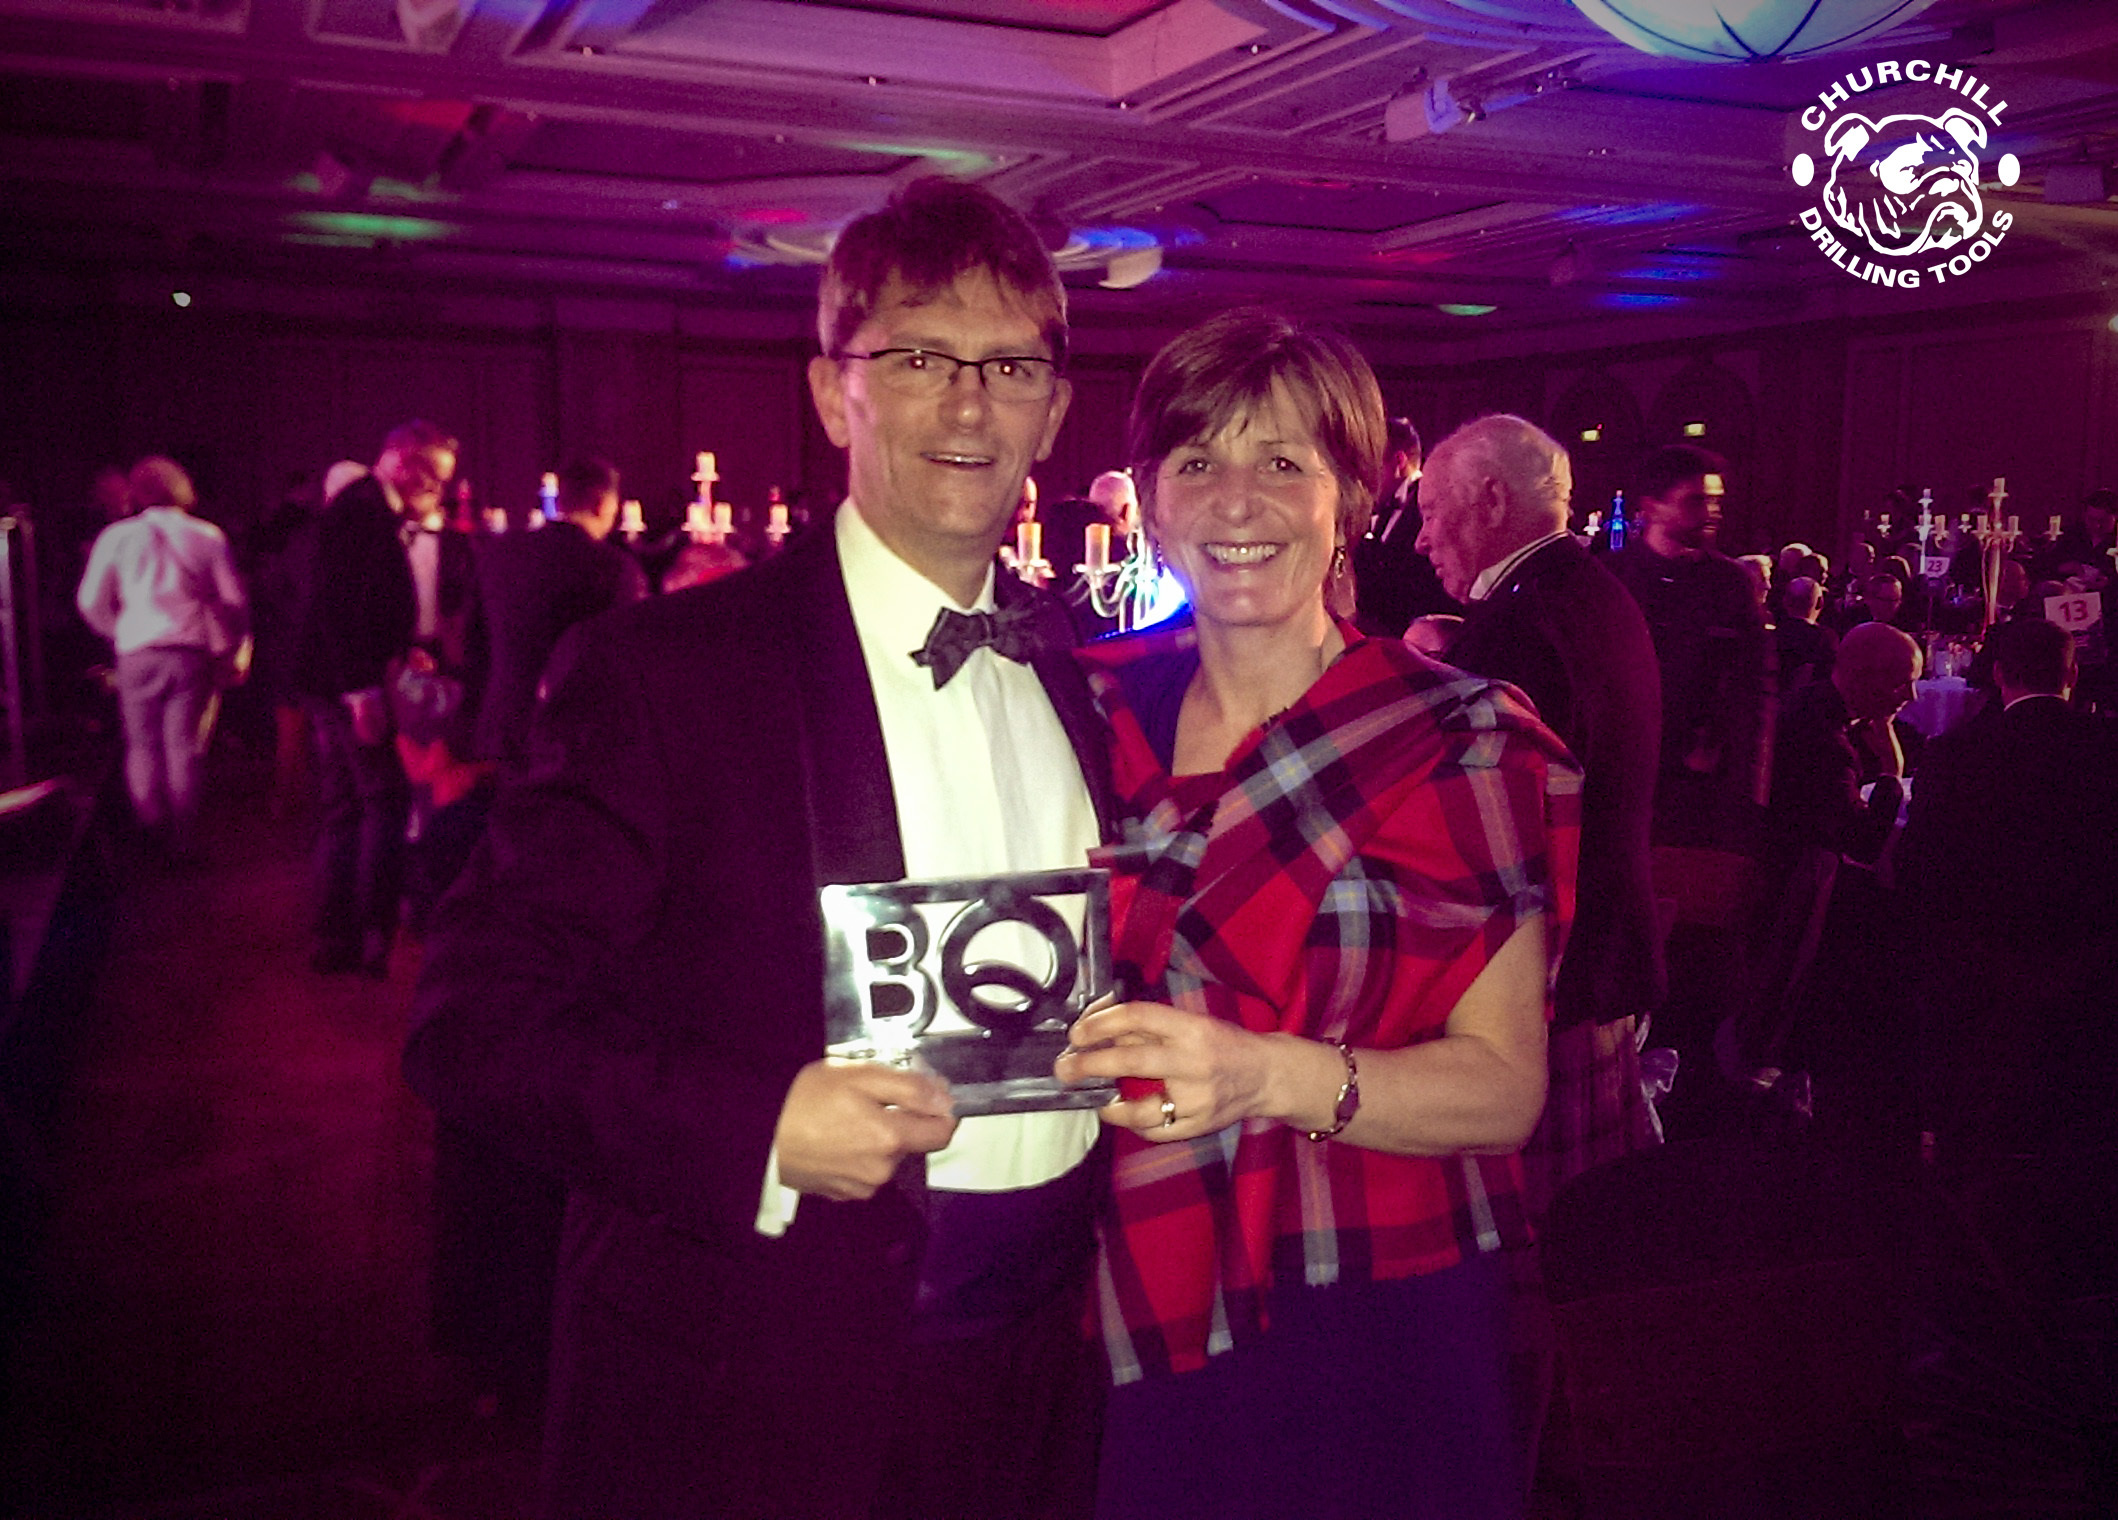 : Churchill Drilling Tools’ CEO and commercial director Mike Churchill celebrates the export award win with his wife, Ailsa.